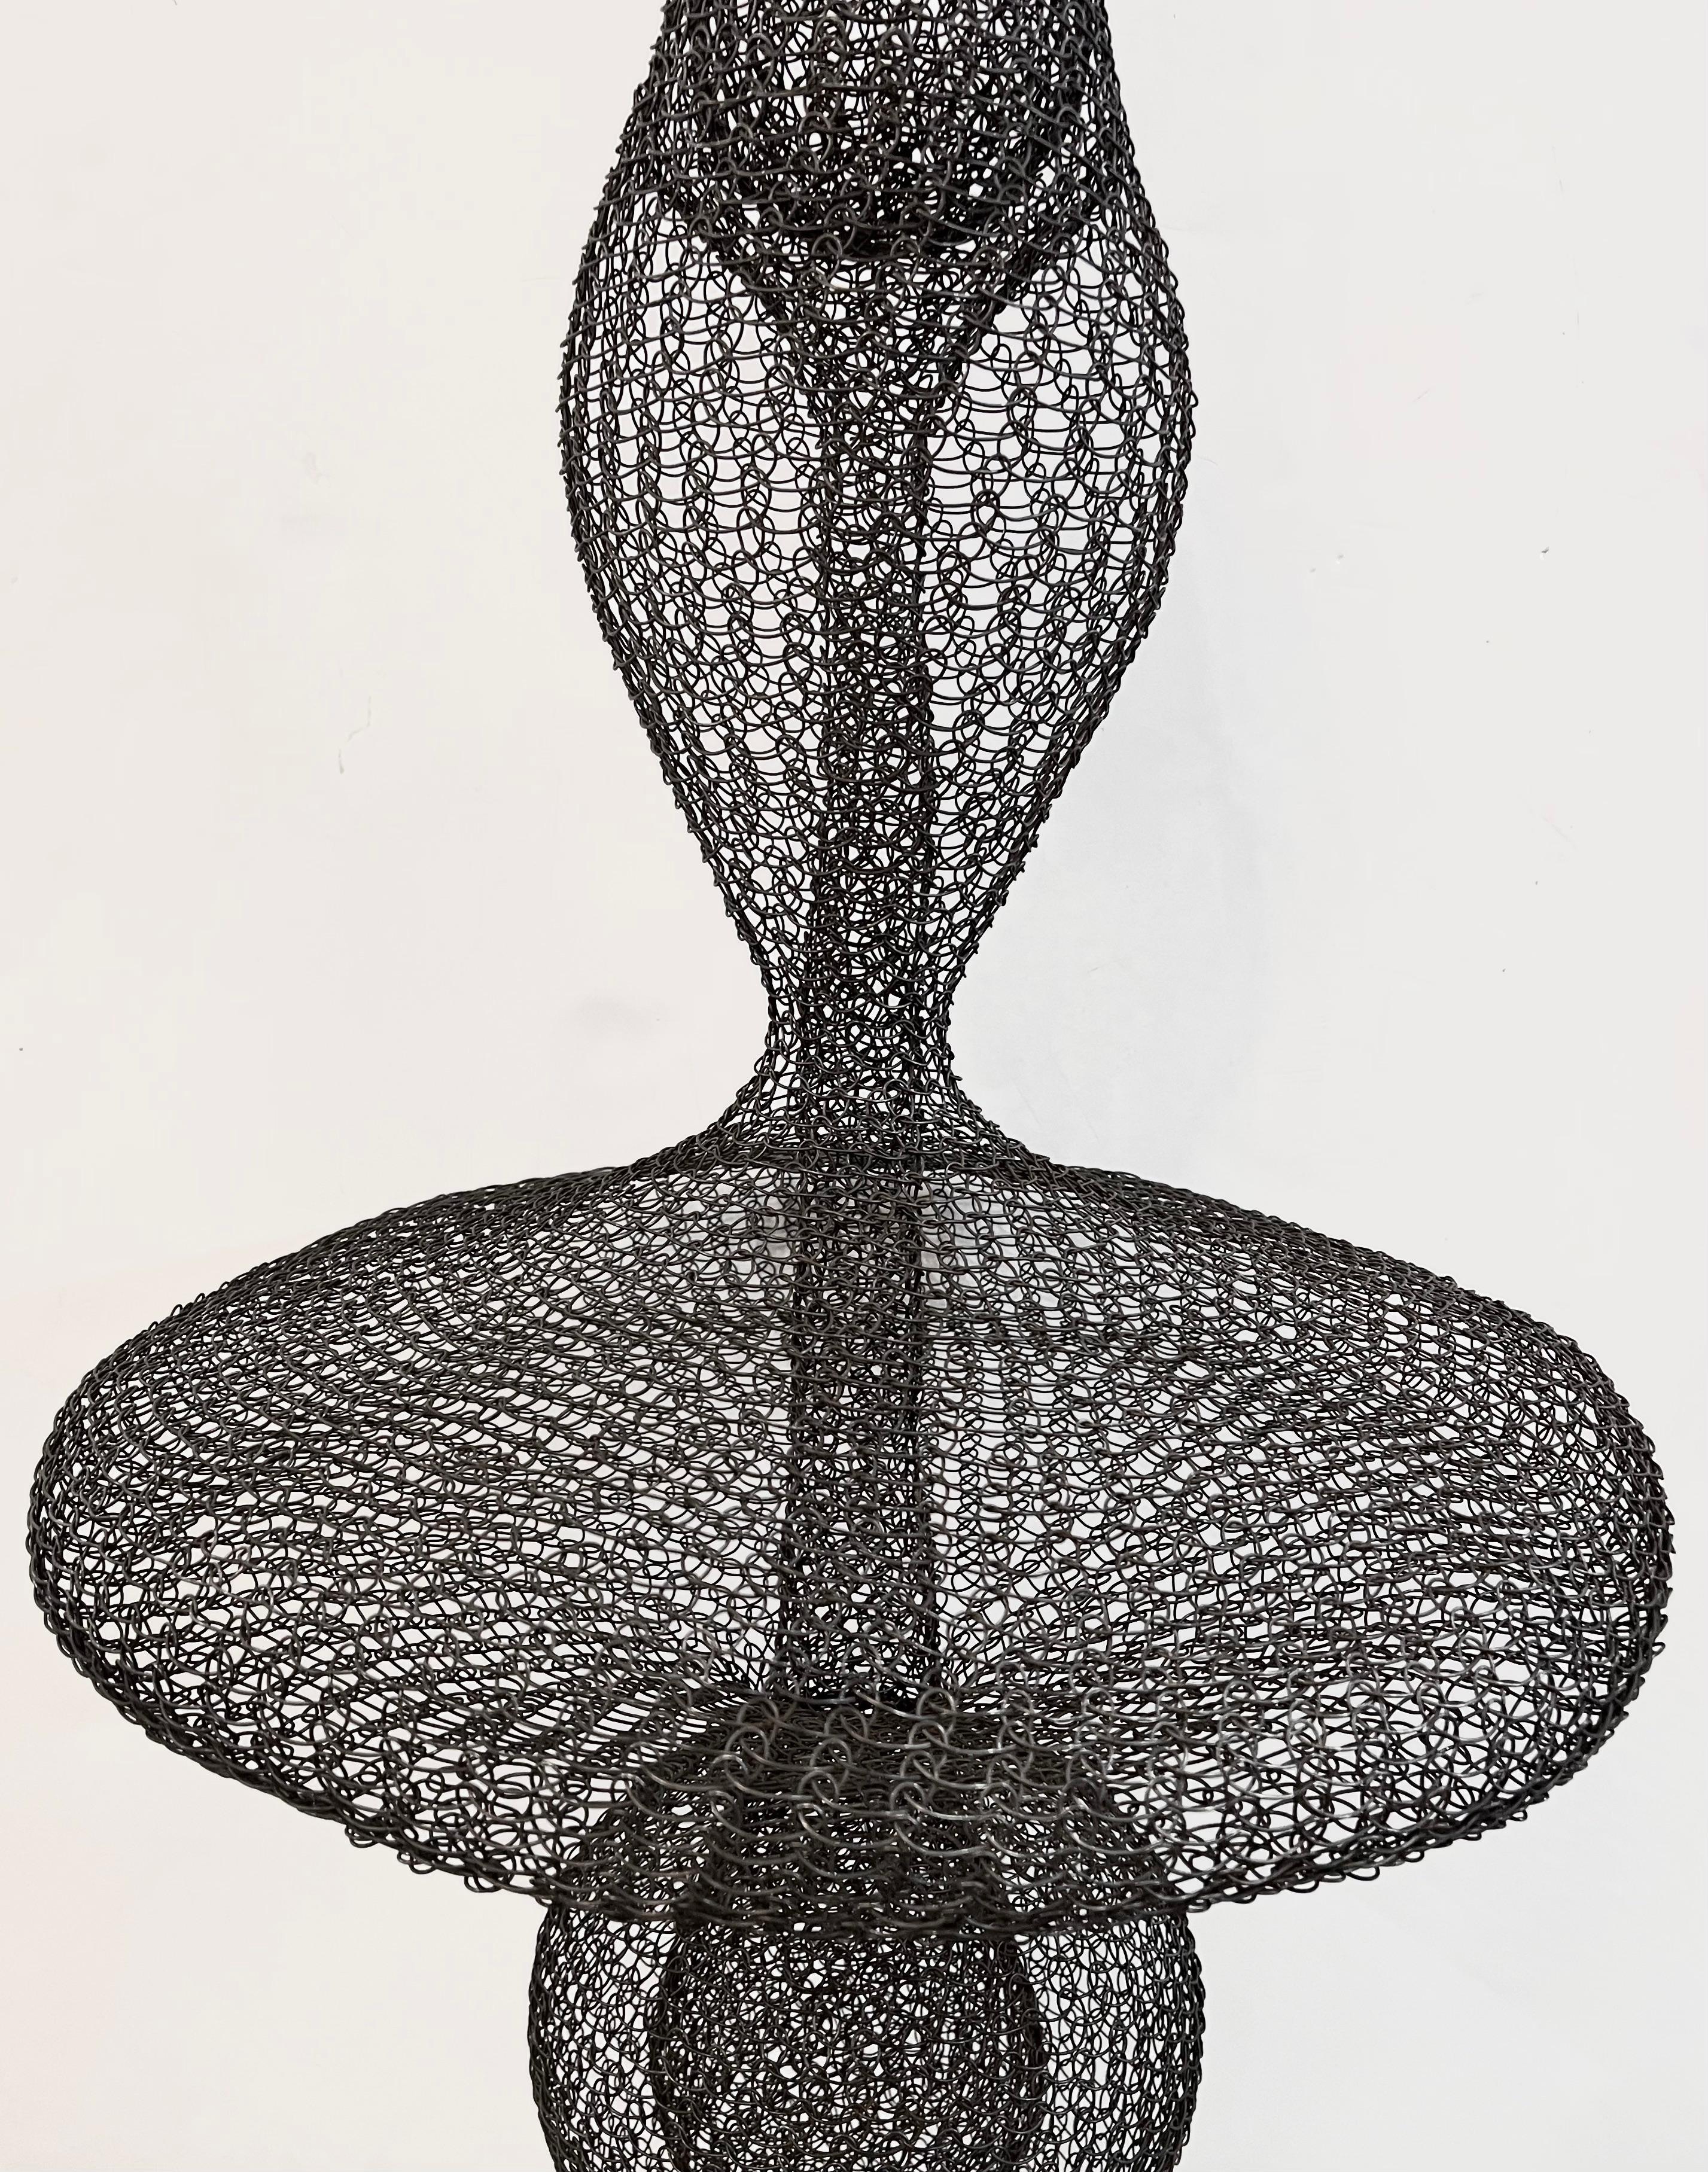 Organic Woven Mesh Wire Sculpture by Ulrikk Dufosse For Sale 2